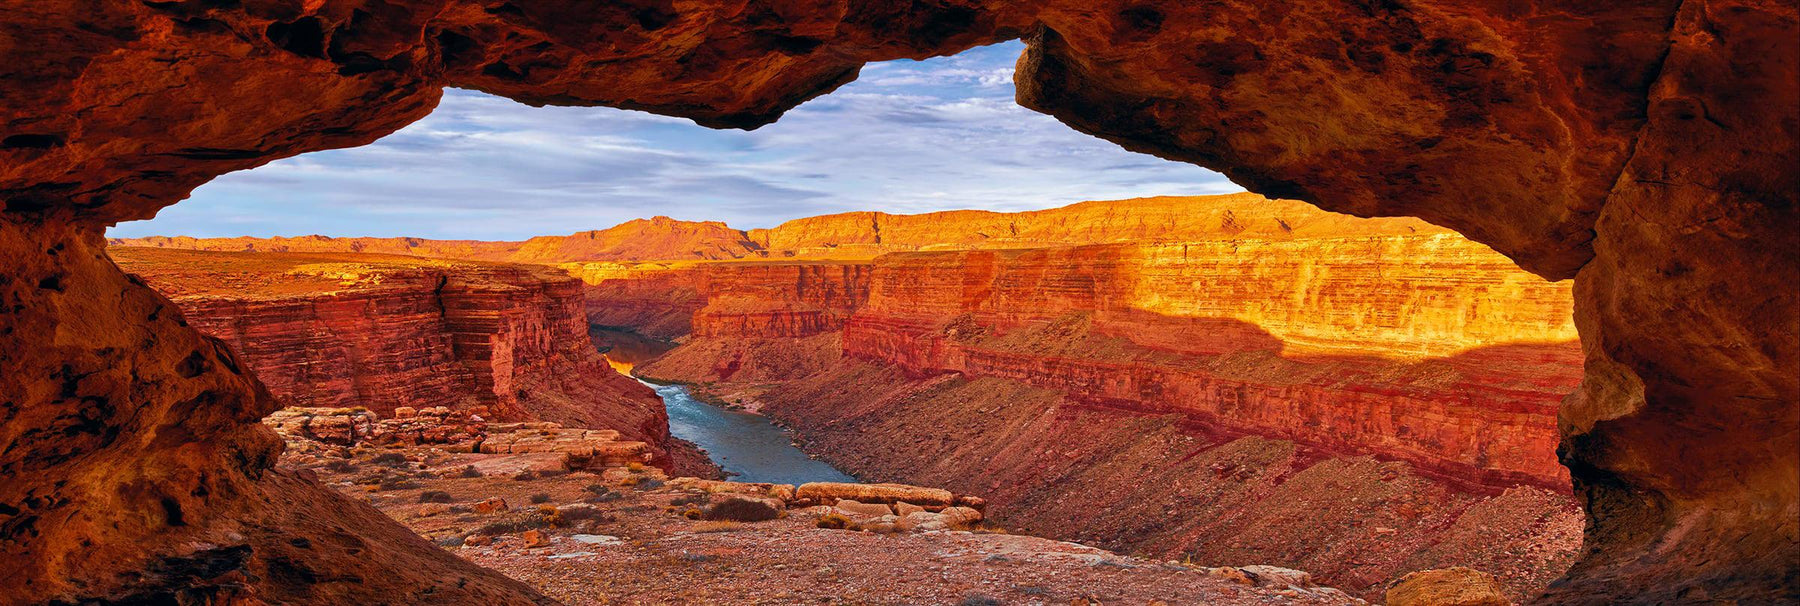 Looking out from a cave across the cliffs and Colorado River within the Grand Canyon Arizona